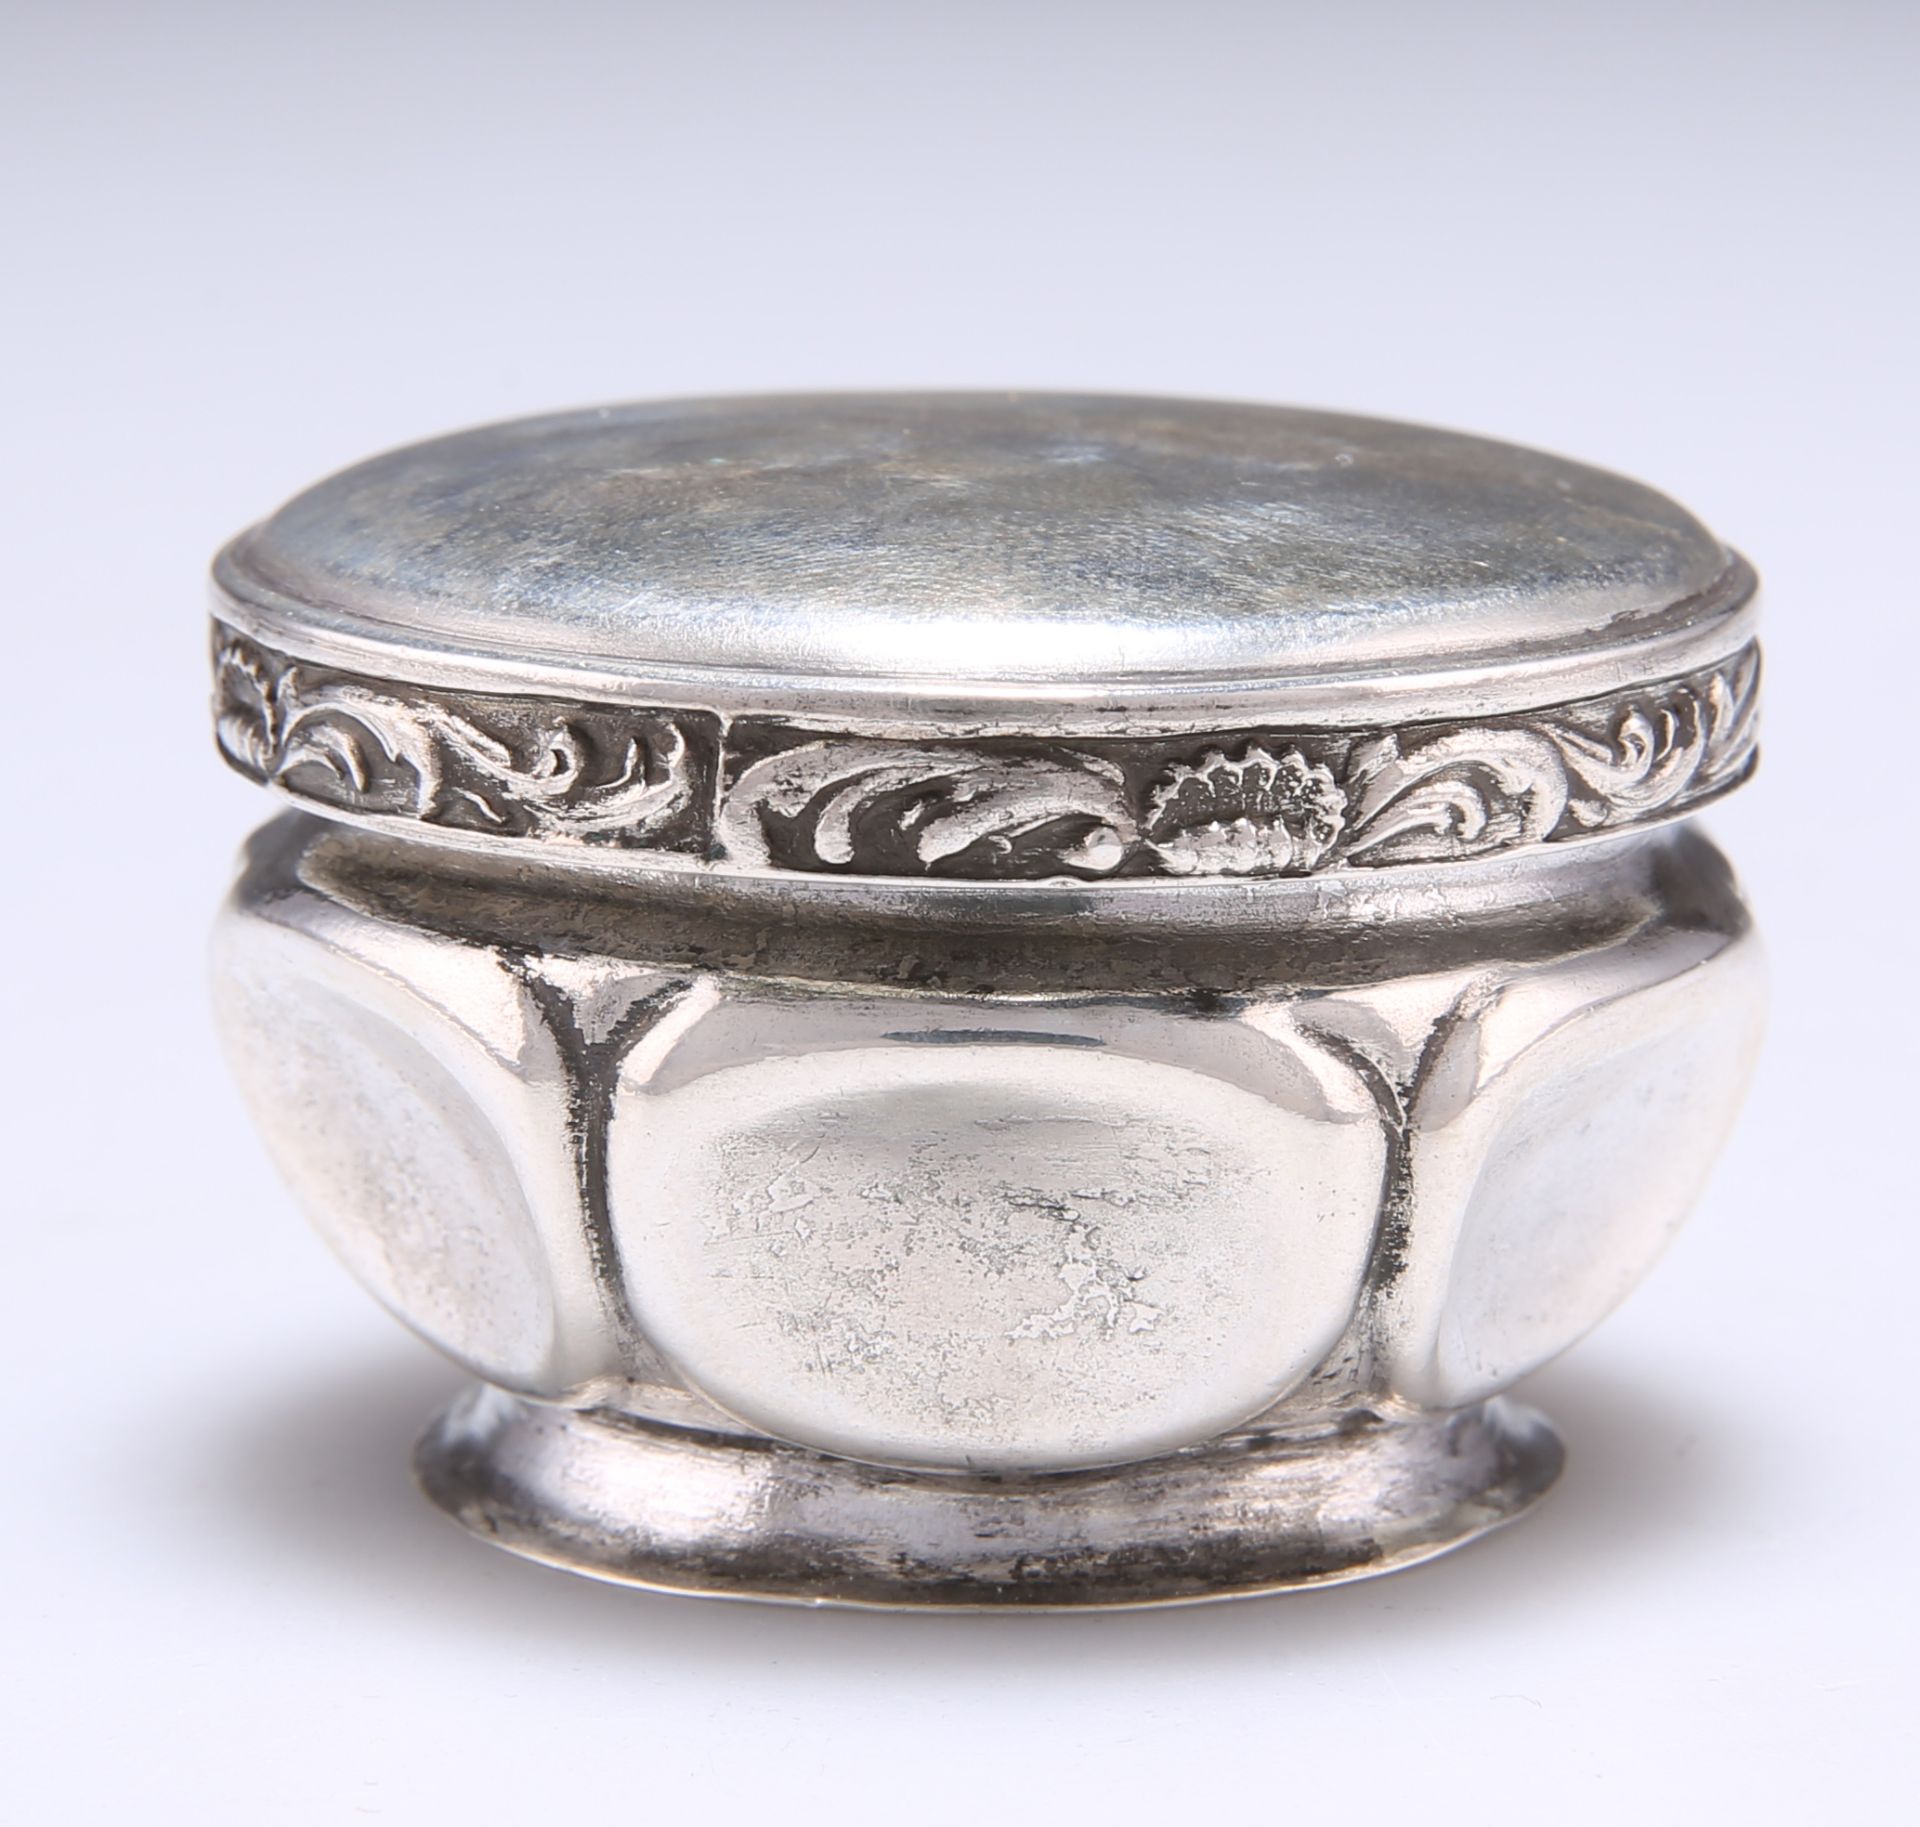 A RUSSIAN SILVER BOX AND COVER